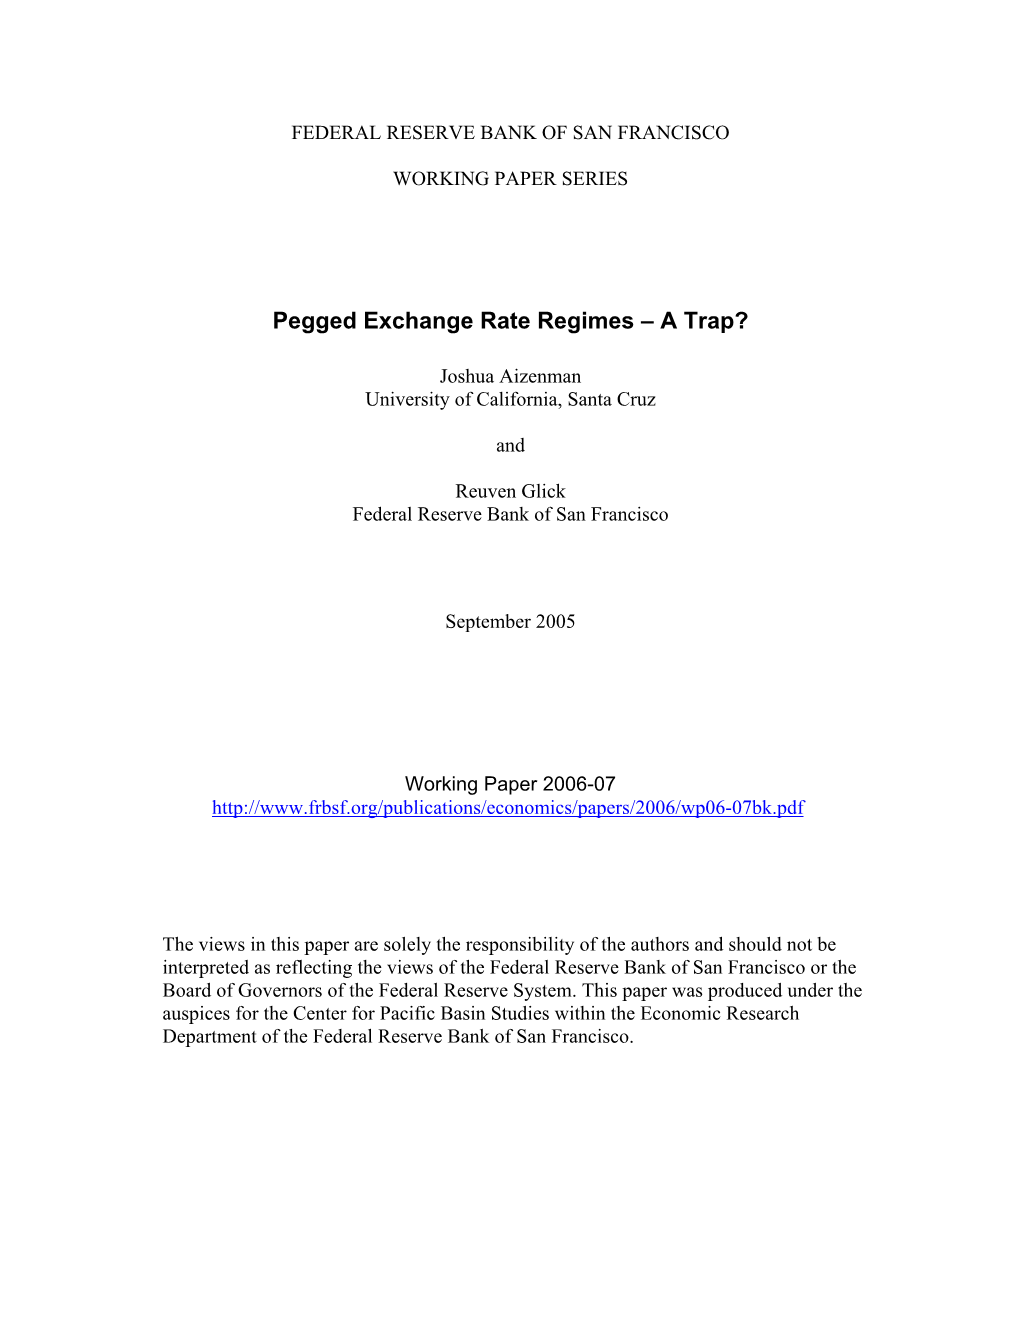 Pegged Exchange Rate Regimes--A Trap?